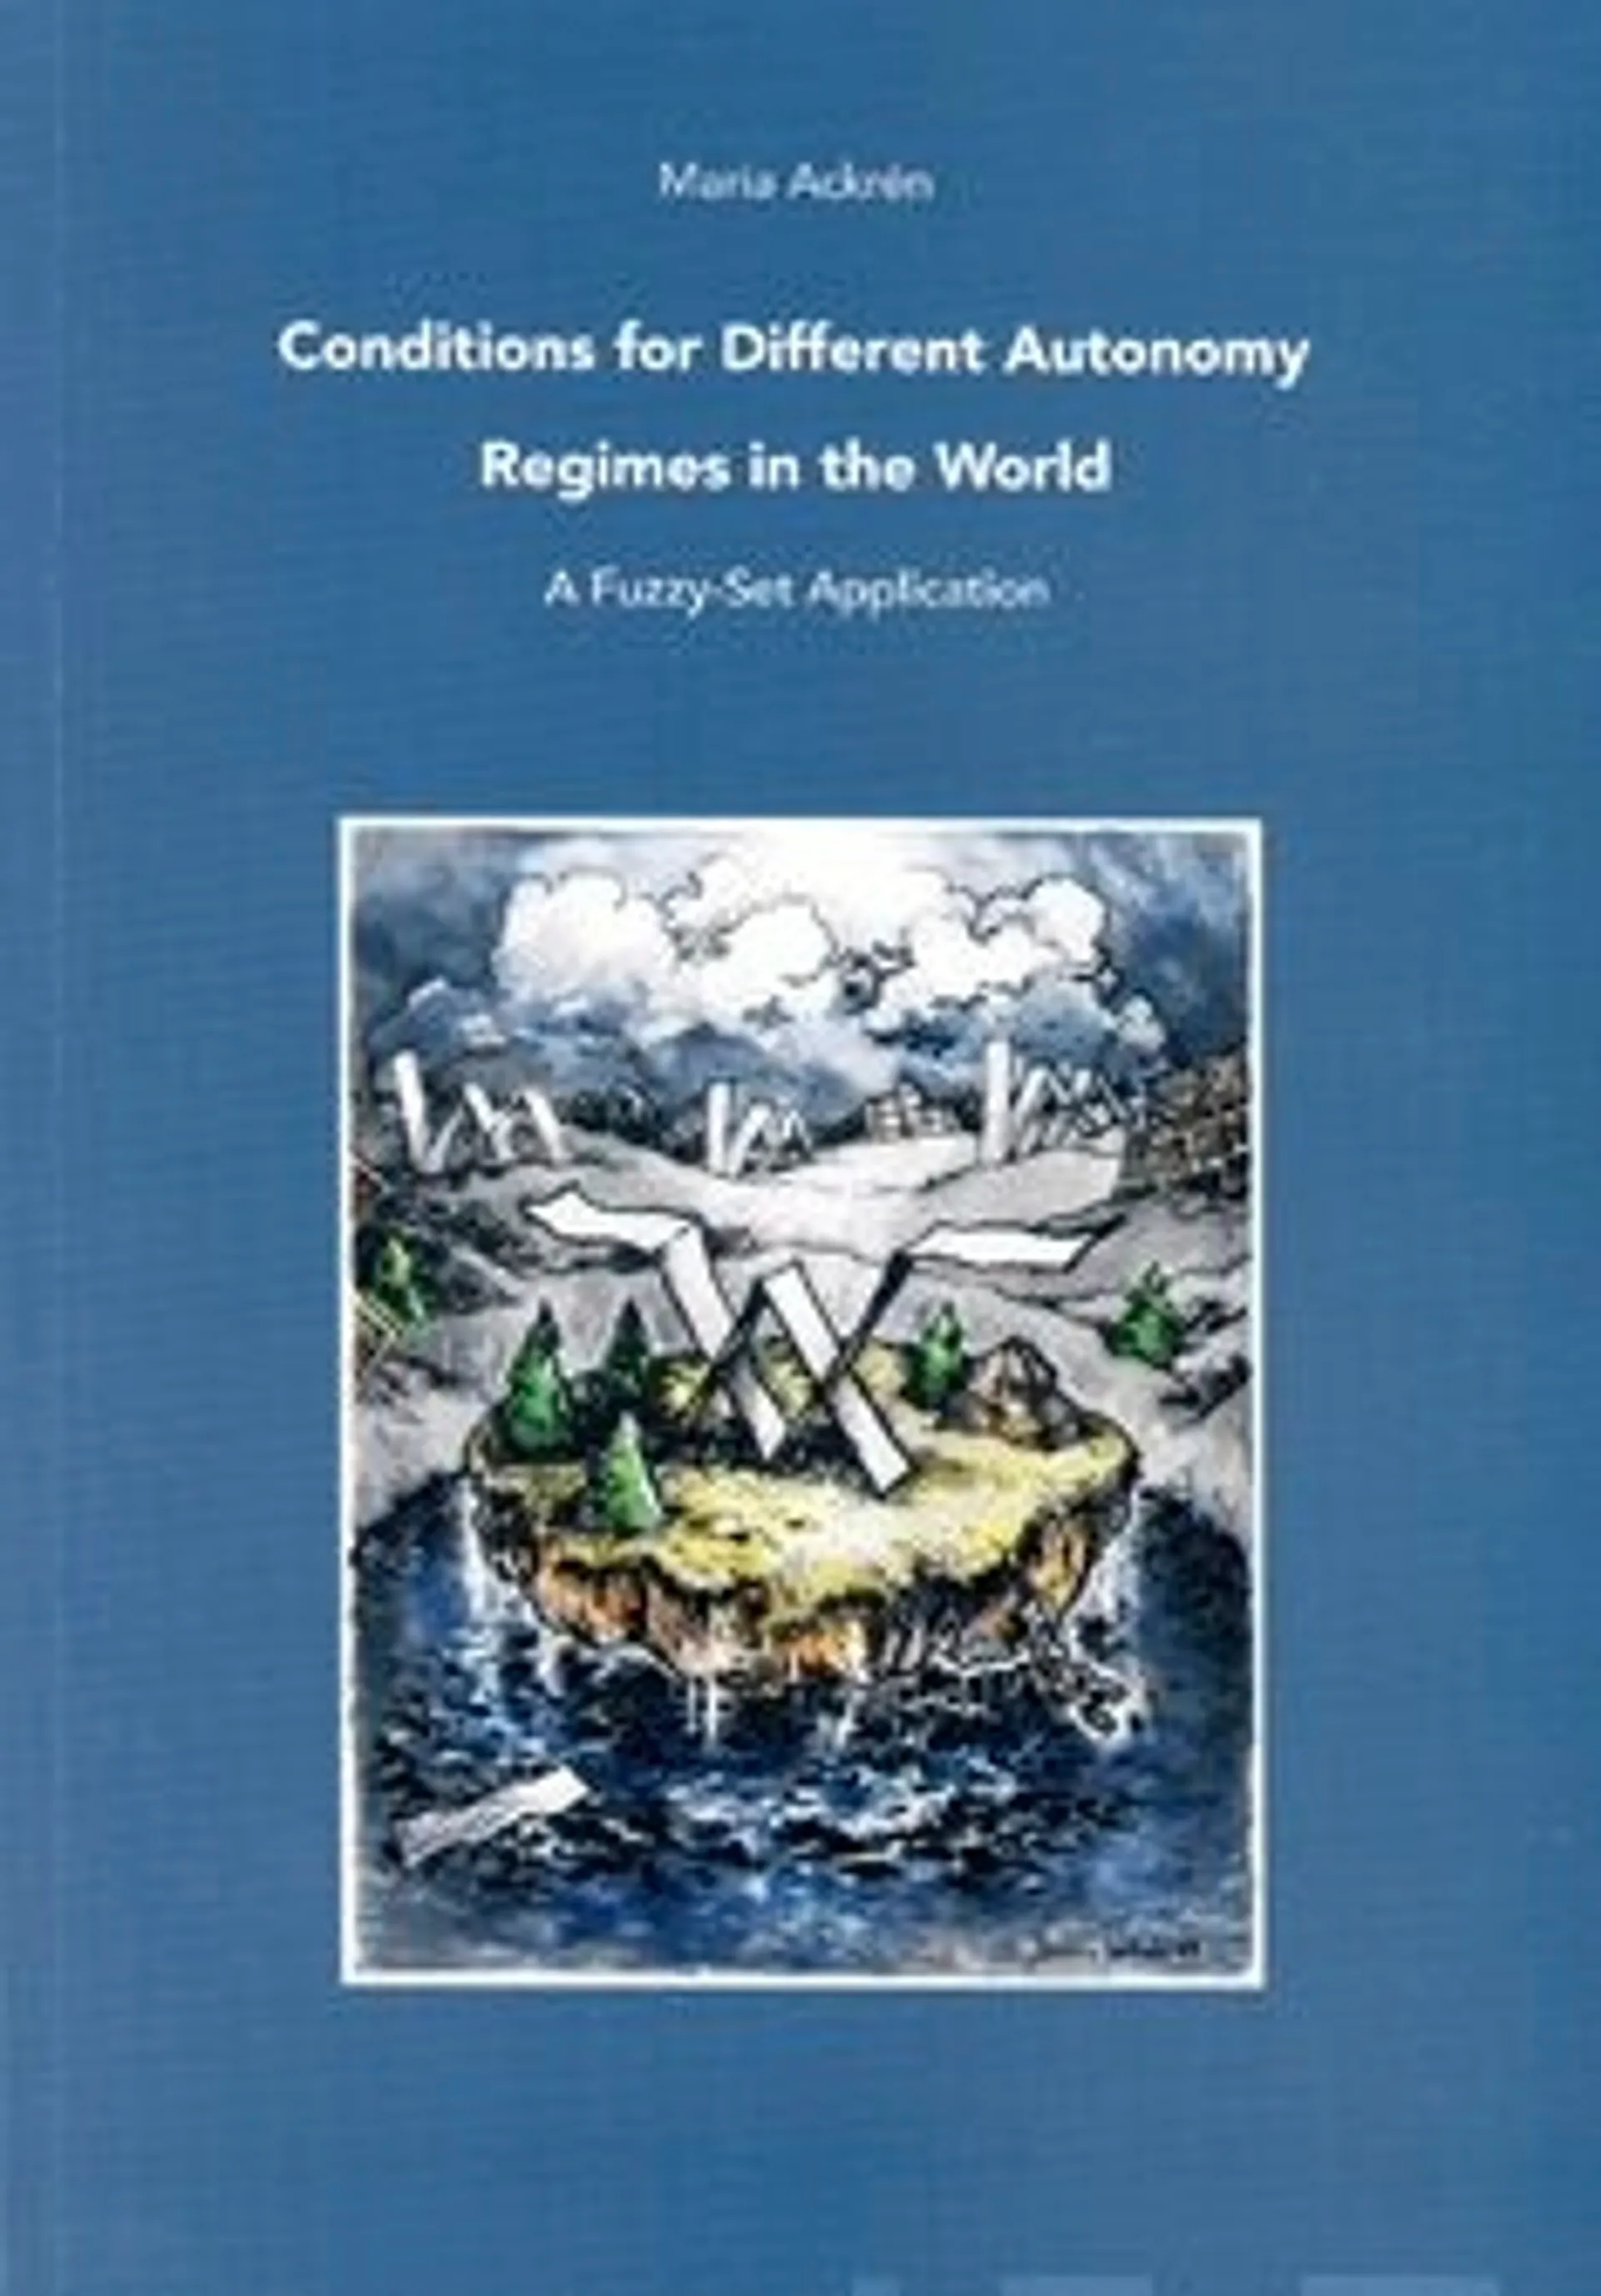 Ackren, Conditions for different autonomy regimes in the world